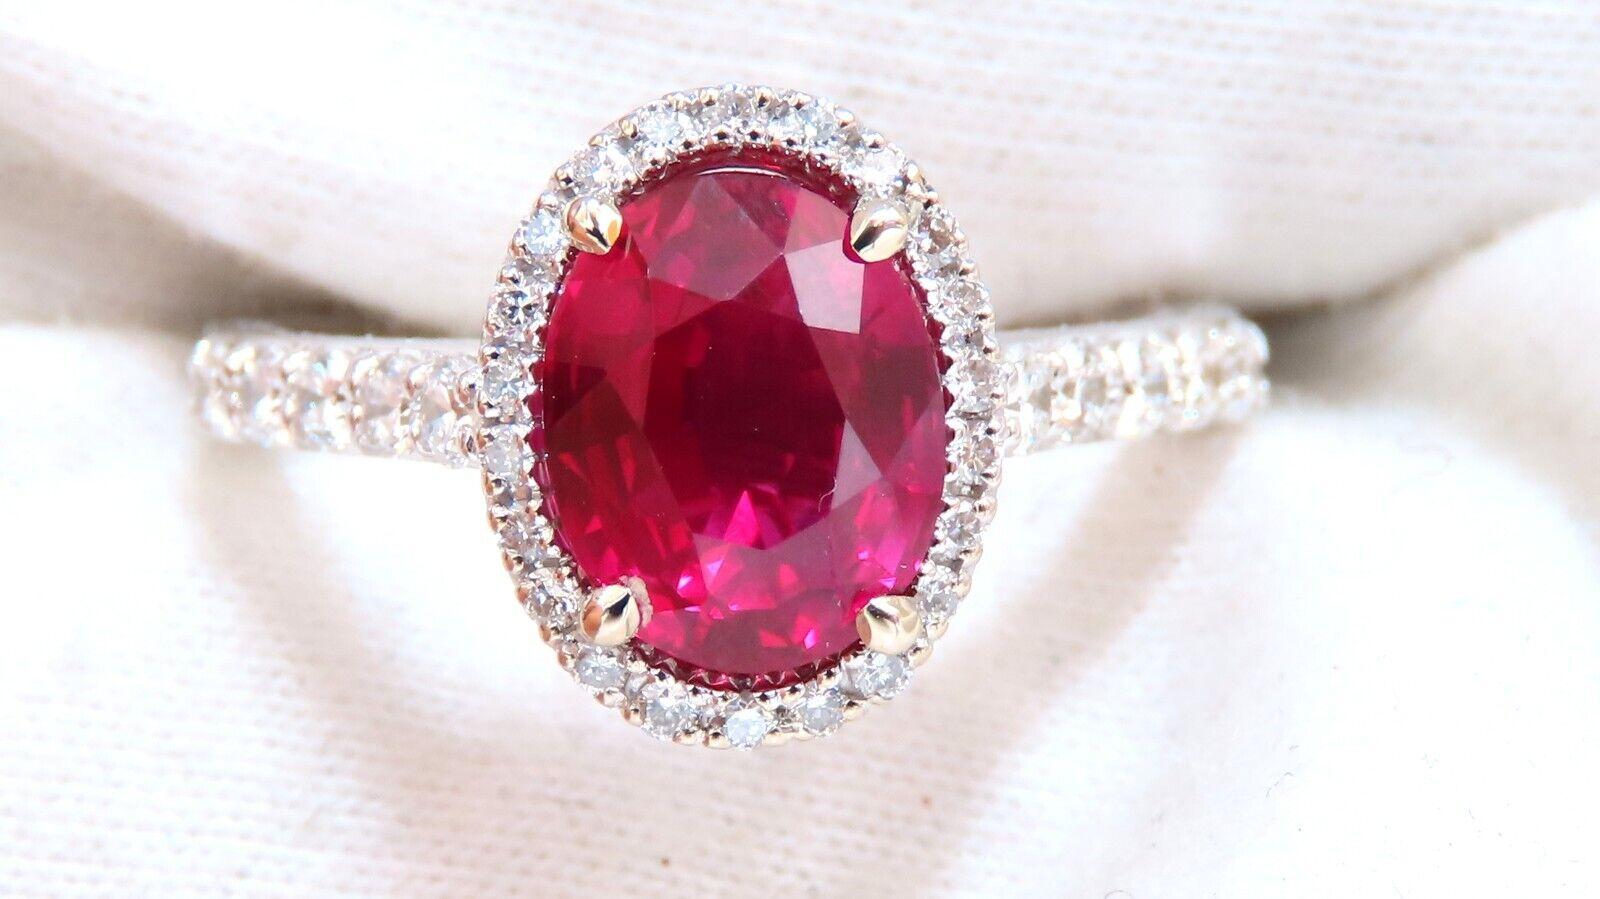 GIA certified oval shape ruby ring.

No heat, oval full cut & clean clairty

8.9x7.1mm.

GIA certificate to accompany.

.50ct natural side round diamonds.

F-G-color, vs2-clarity

18 karat white gold

Depth of ring 7.3 mm

Deck of ring: 12 x